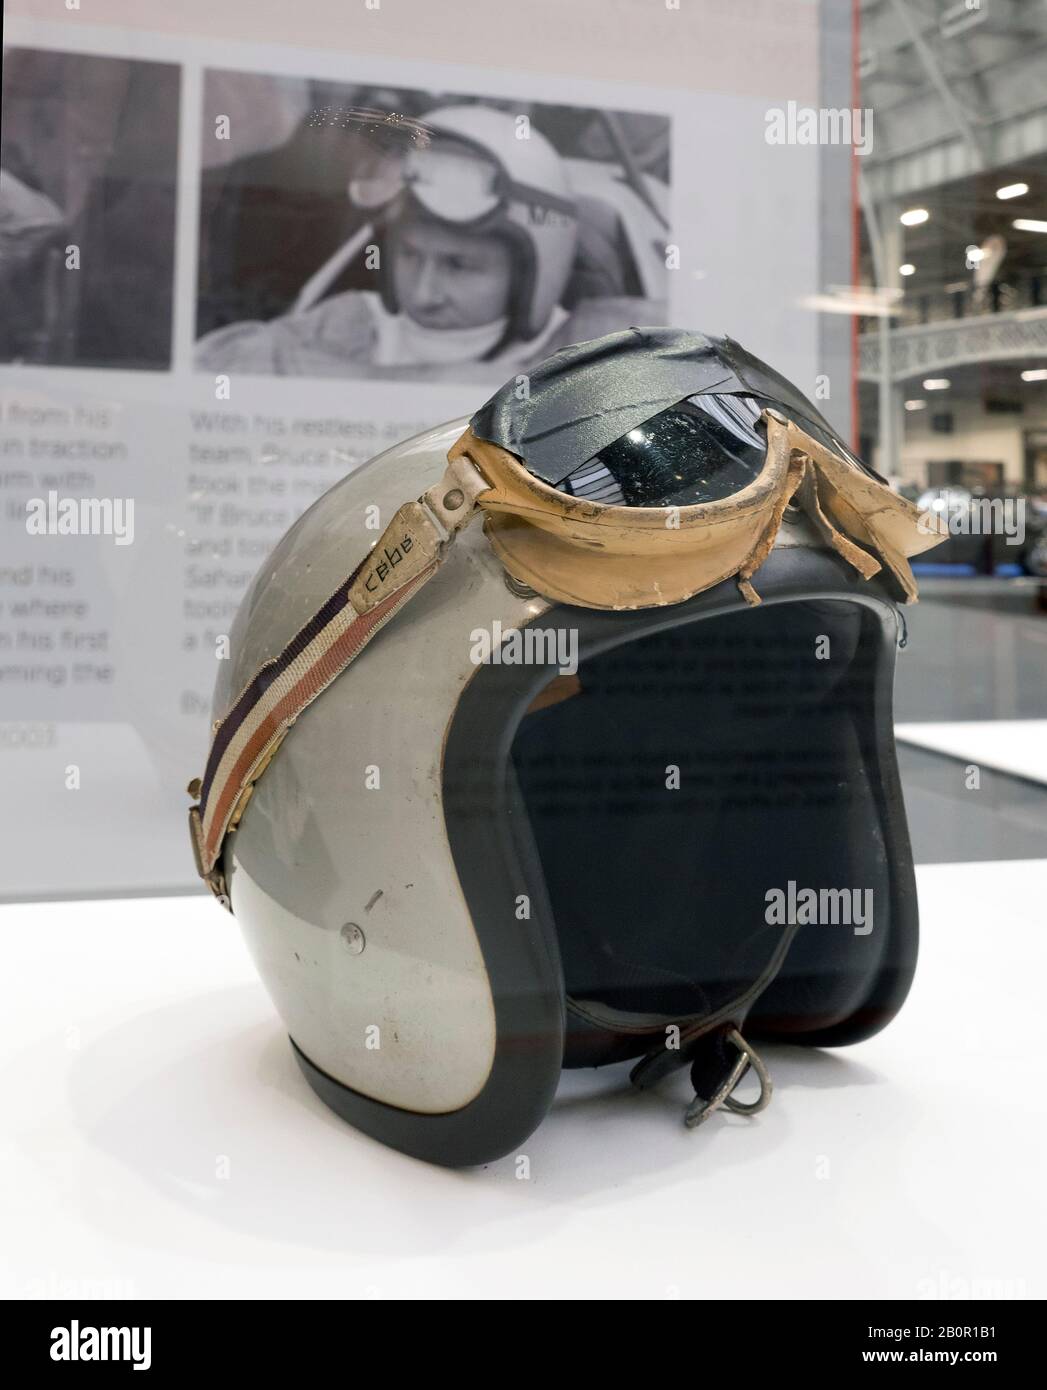 A tribute to Bruce McLaren display of one of his early crash helmet's at The London Classic Car Show at Olympia London UK 20/02/2020 Stock Photo